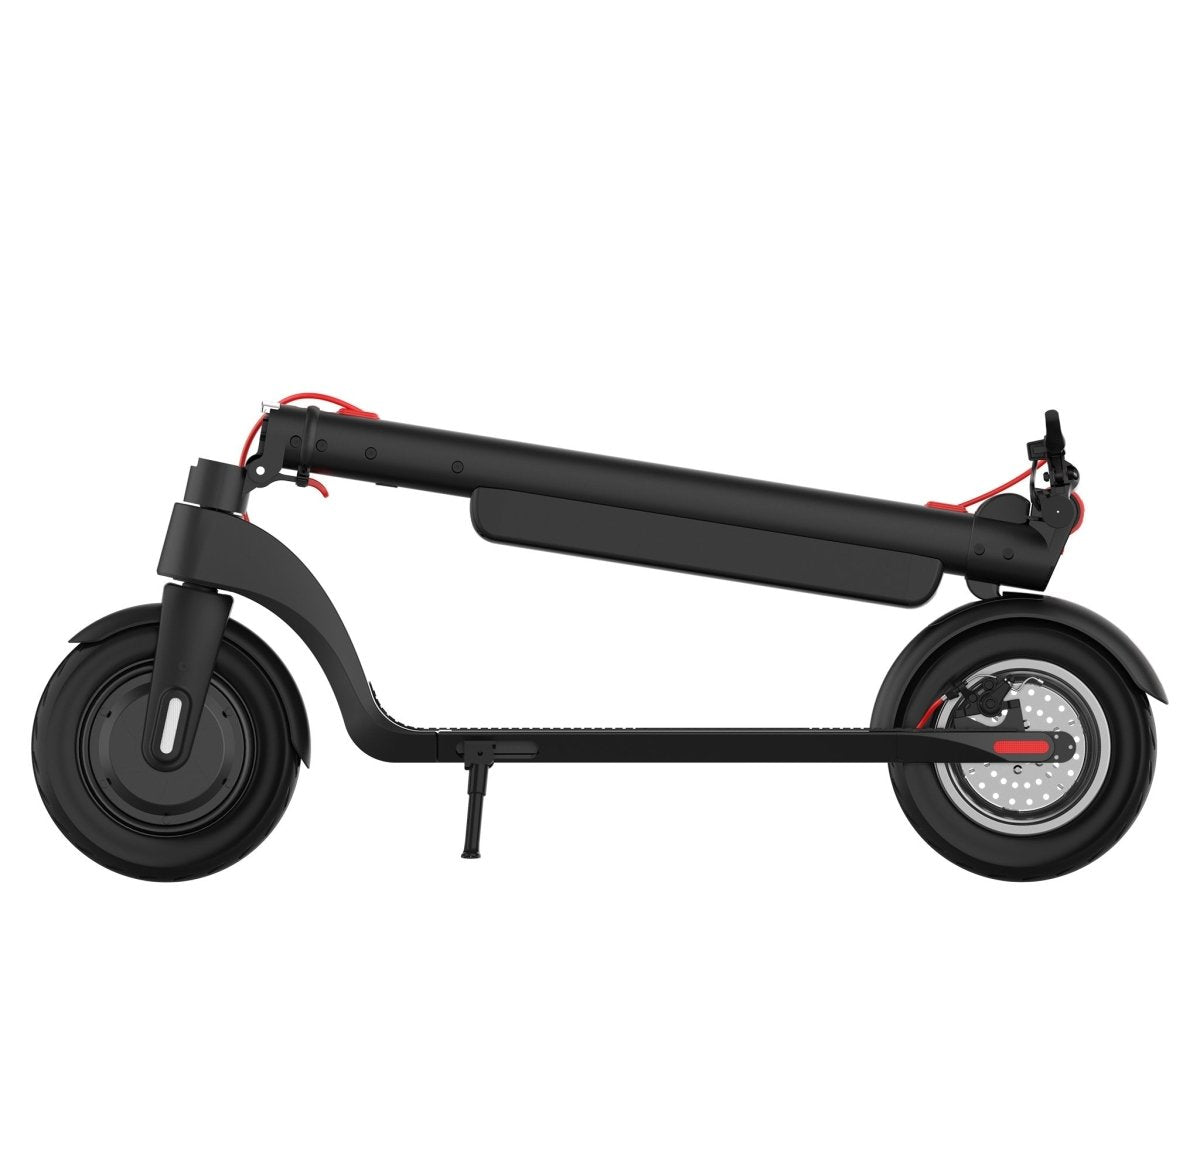 HX X8 e-scooter with collapsible stem | Horizon Micromobility